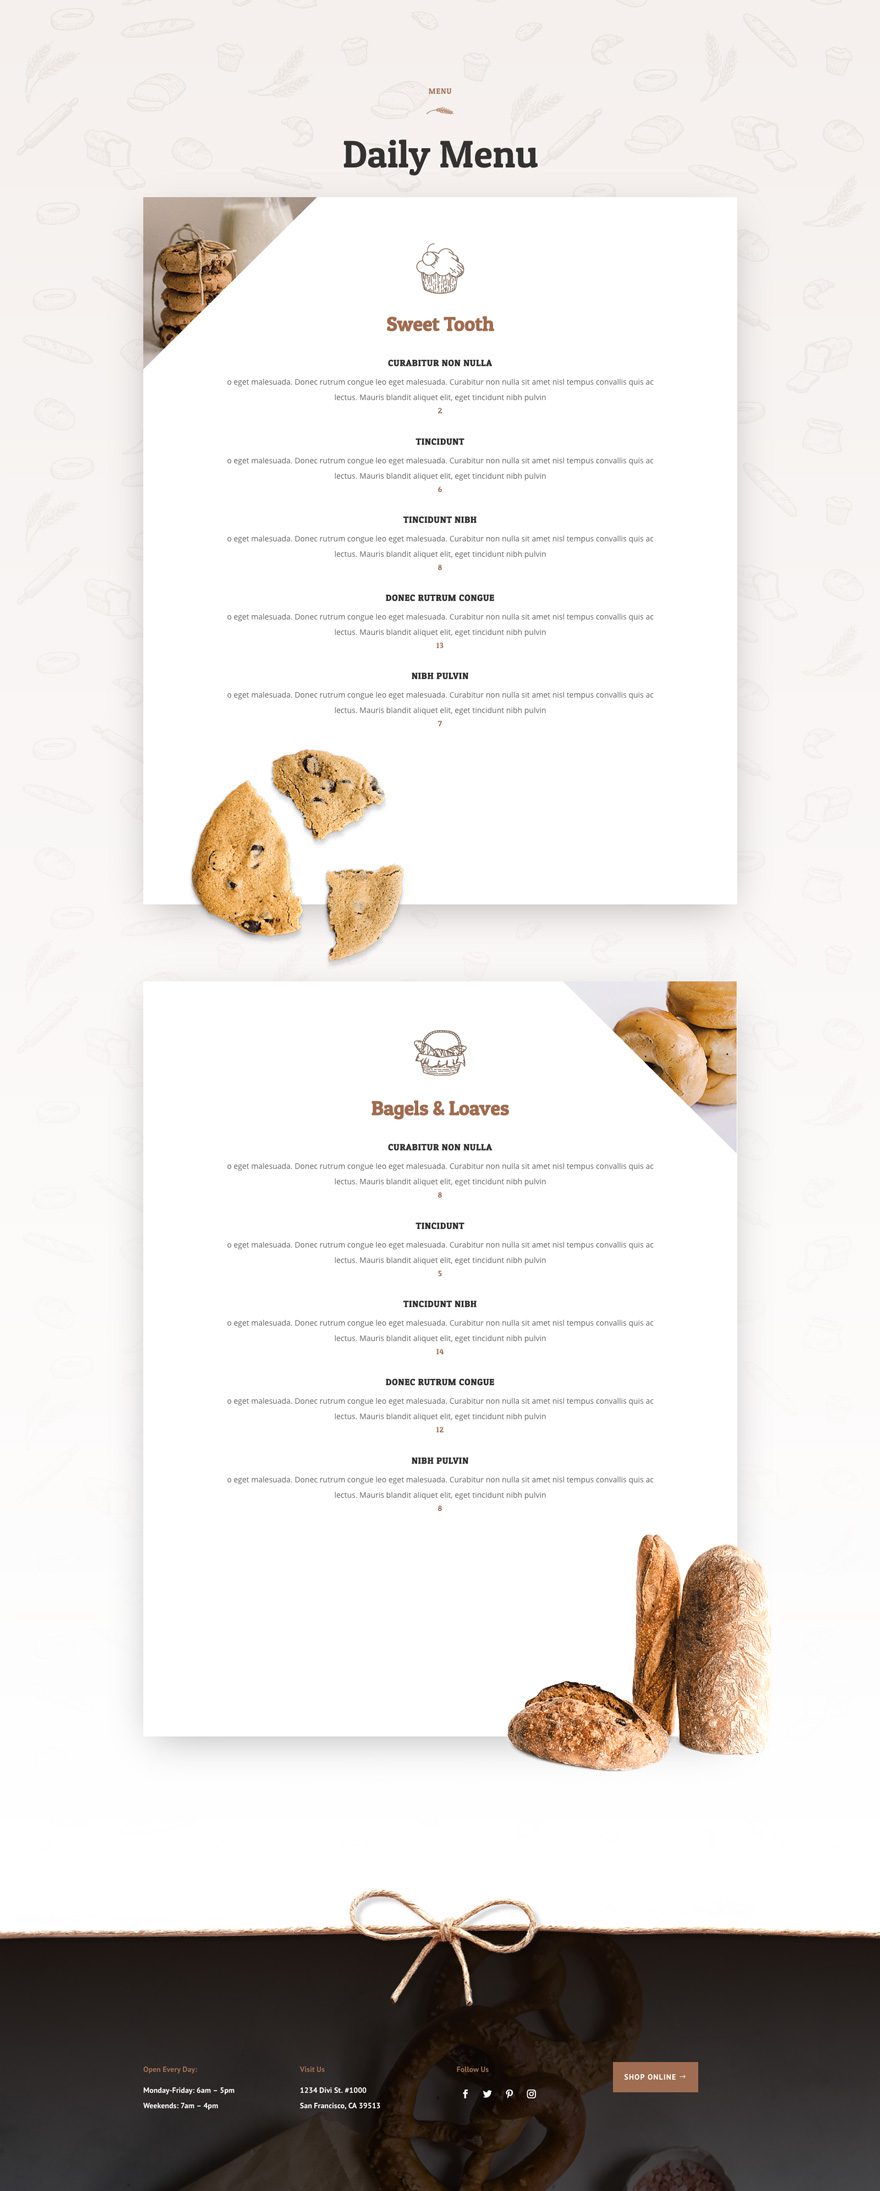 divi bakery layout pack